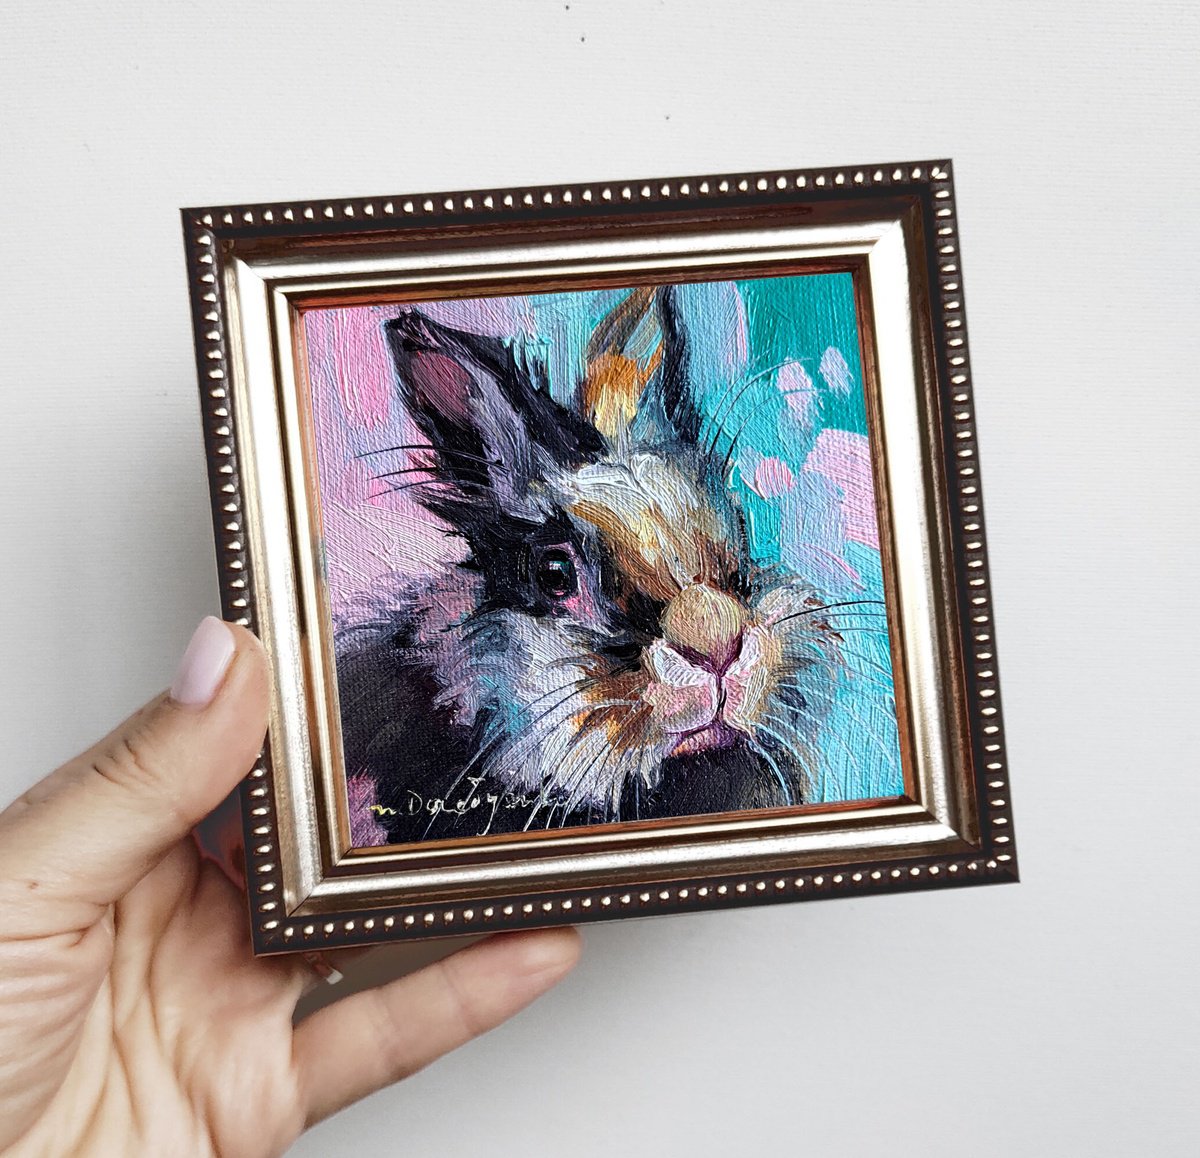 Cute rabbit painting original oil framed 4x4, Small framed art rabbit artwork turquoise pu... by Nataly Derevyanko